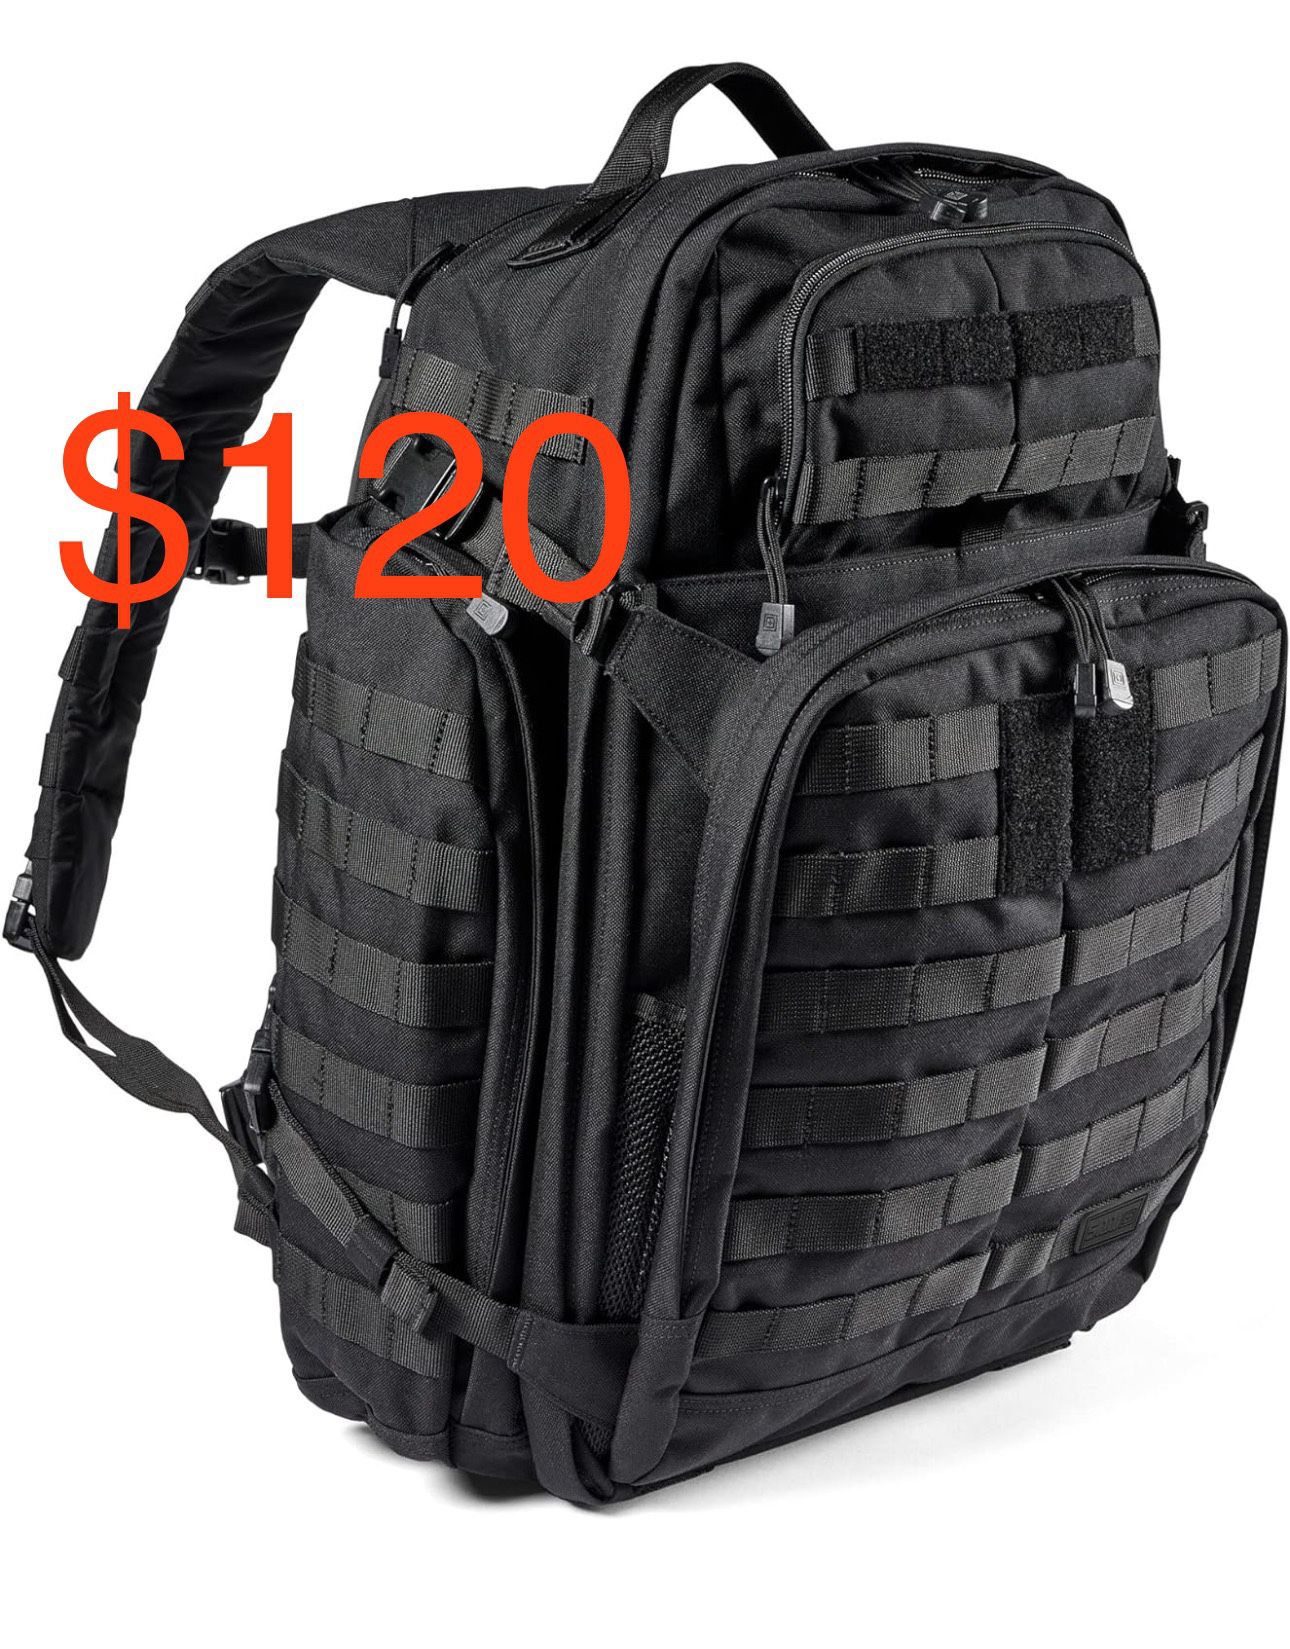 5.11 Tactical Rush 72 Backpack Brand New W/Tags